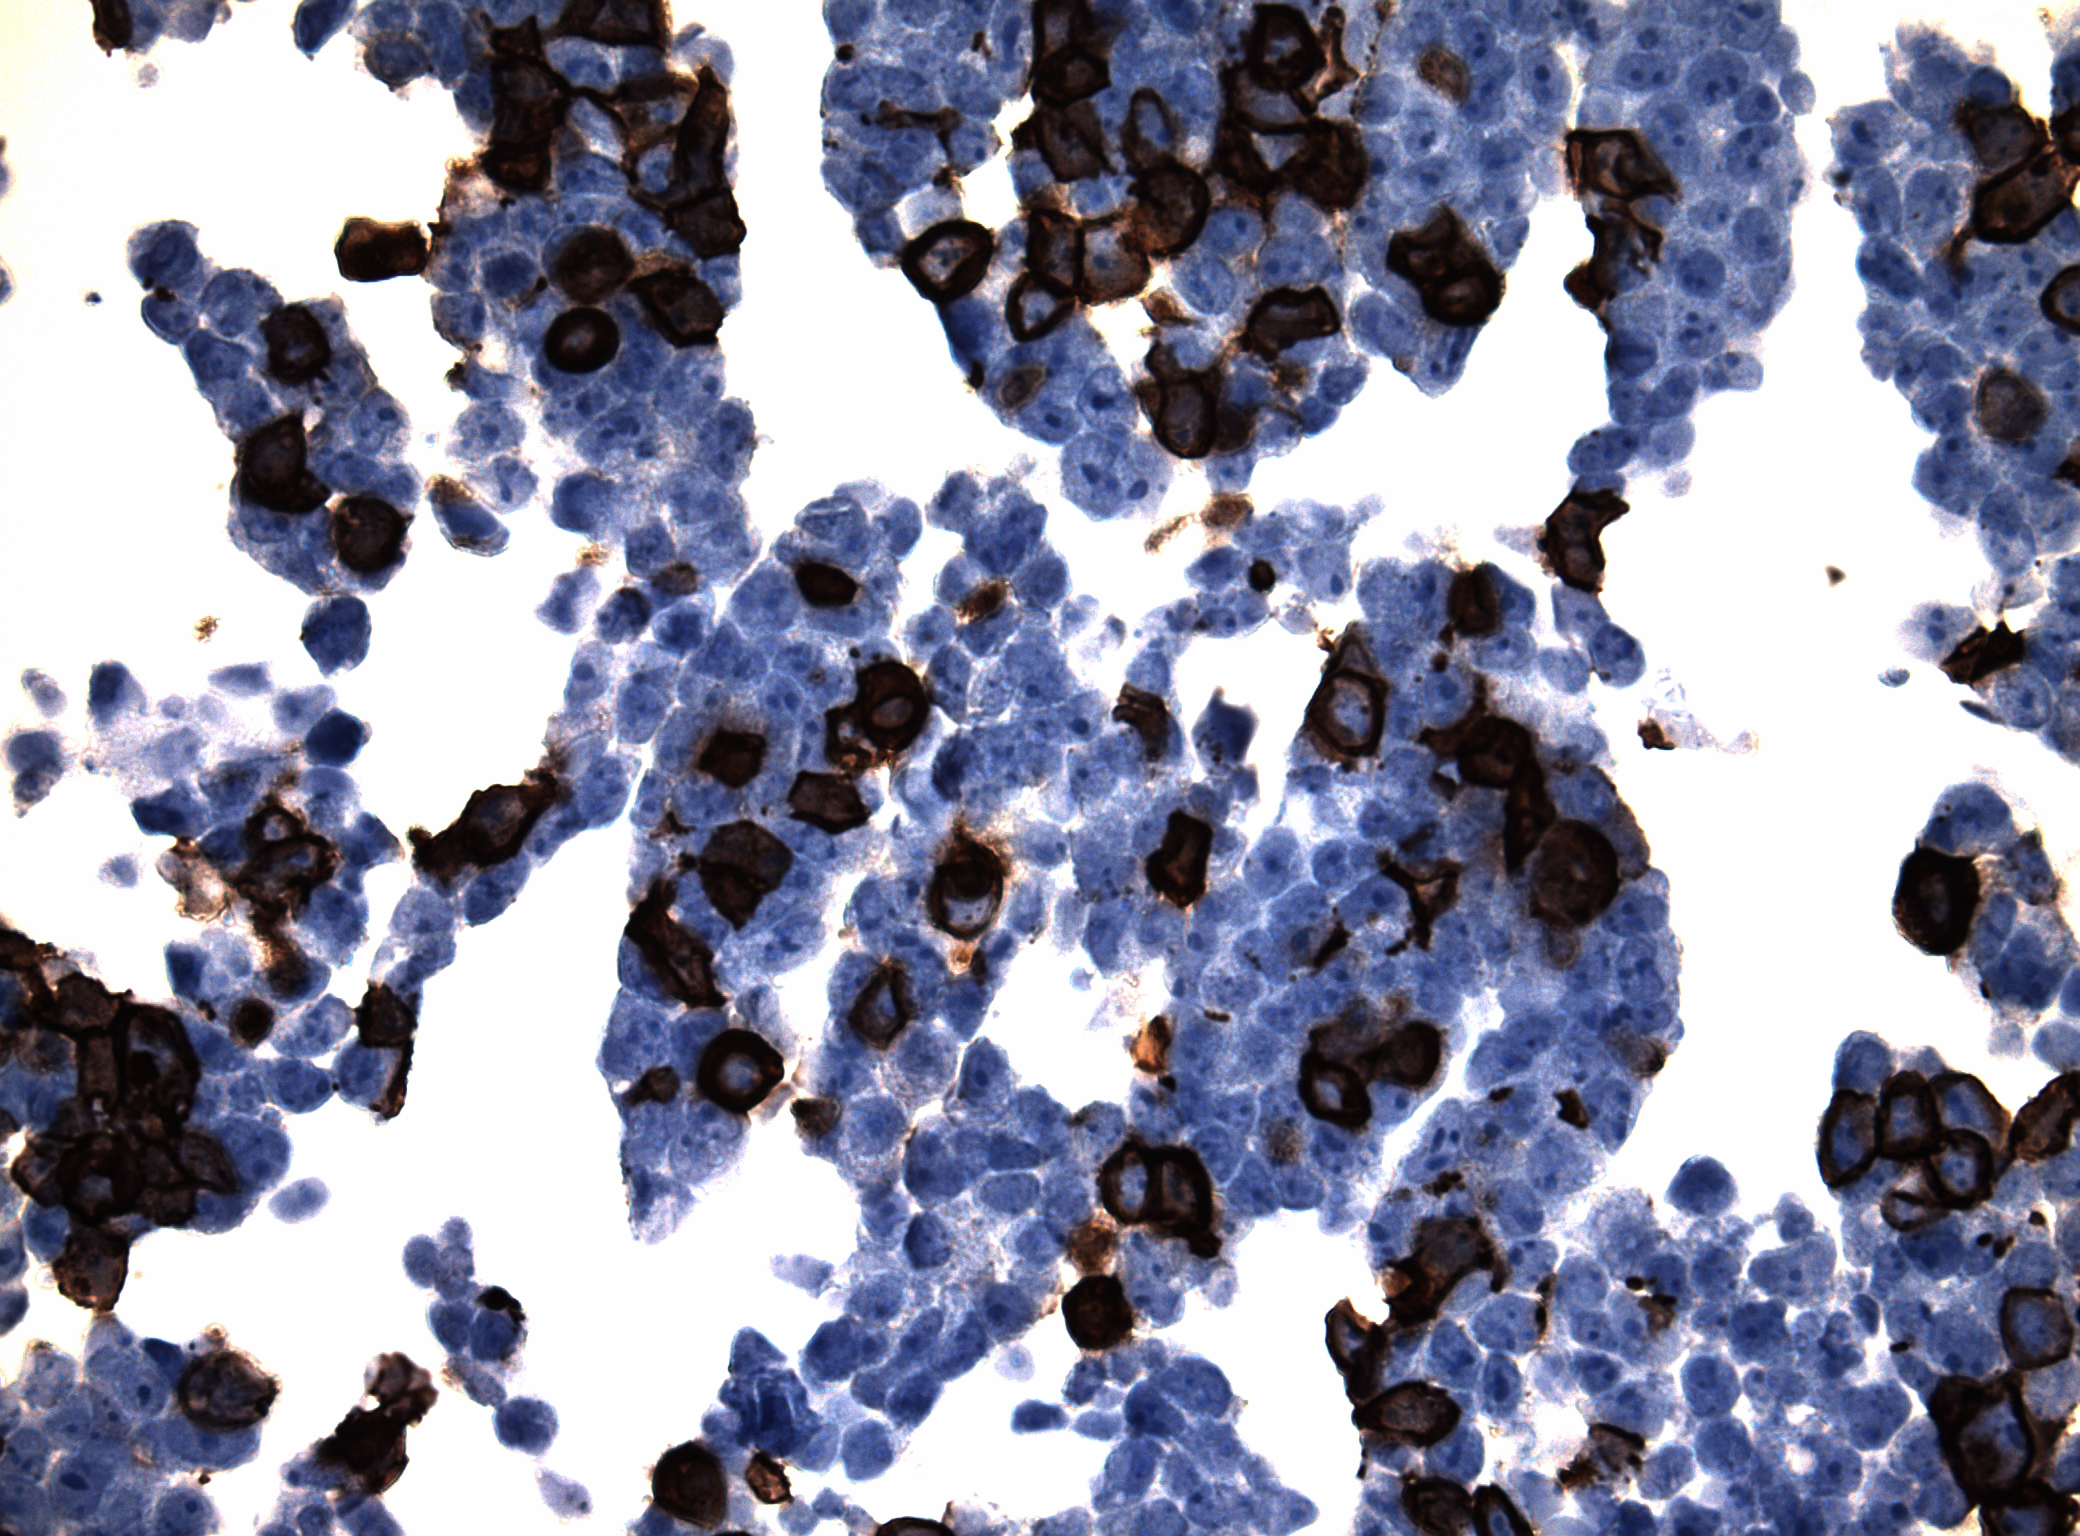 Immunohistology staining on HCAR2 overexpressed cytosection TS406527P5 with mouse anti DDK clone OTI11C3 C/N TA180144 at 1:400 dilution 4C O/N. Antibody staining was achieved with HIER Citrate pH6 , Polink1 with DAB chromogen detection kit (D11-18). Positive stain shown with the brown chromogen present. HEK293T cells were transfected with cDNA clone RC406527, 5 micron sections, 40x magnification